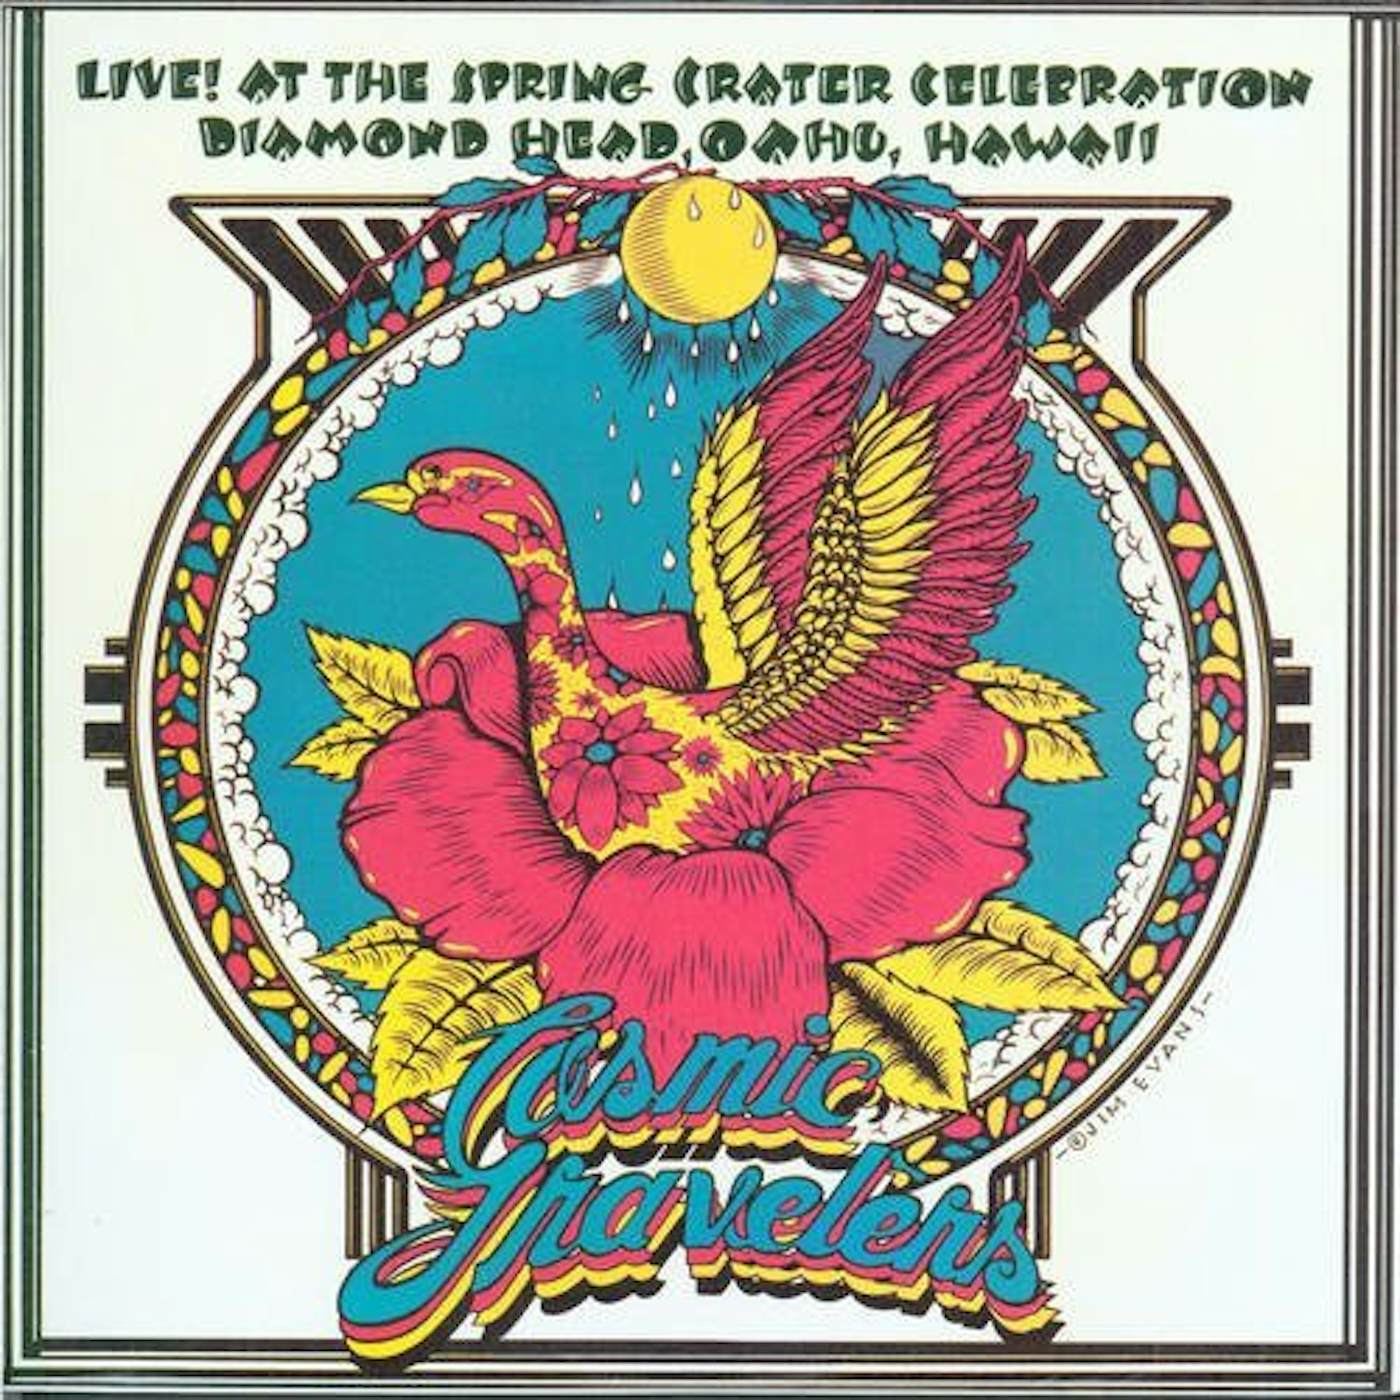 Cosmic Travelers LIVE AT THE SPRING CRATER CELEBRATION CD